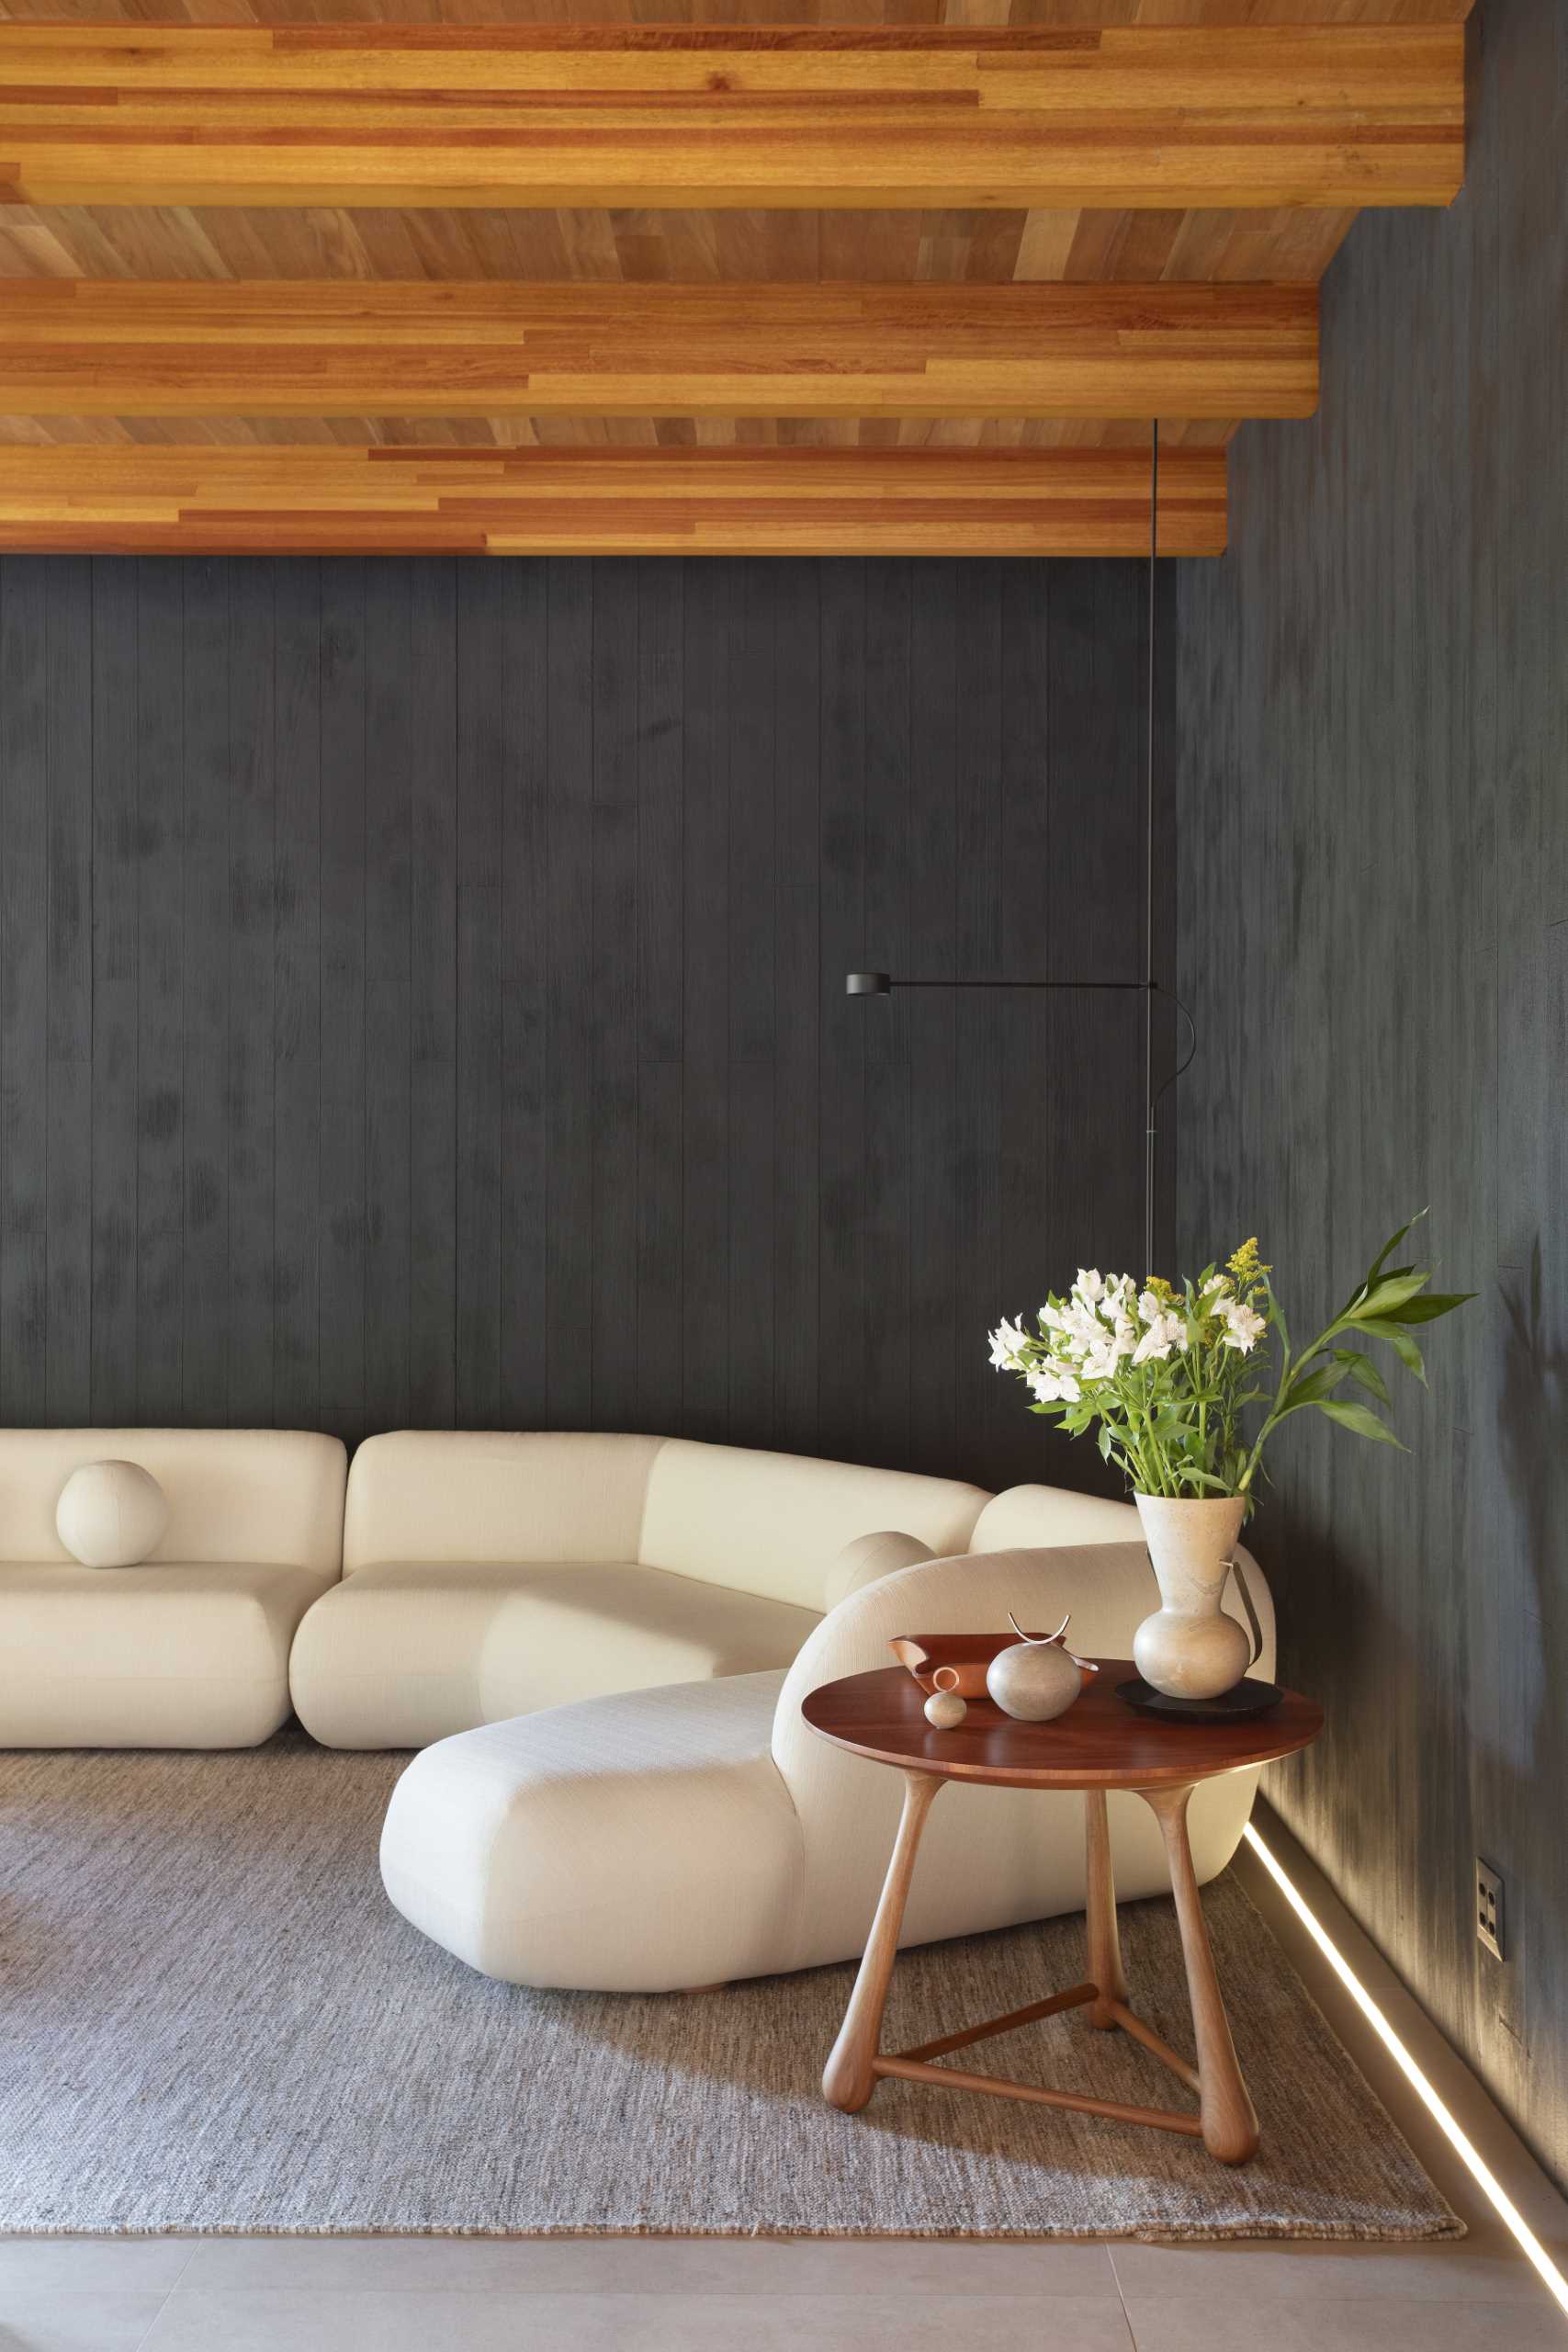 In this modern TV room, there's a dark wood accent wall made from Muiracatiara wood slats finished with a Shou Sugi Ban treatment.